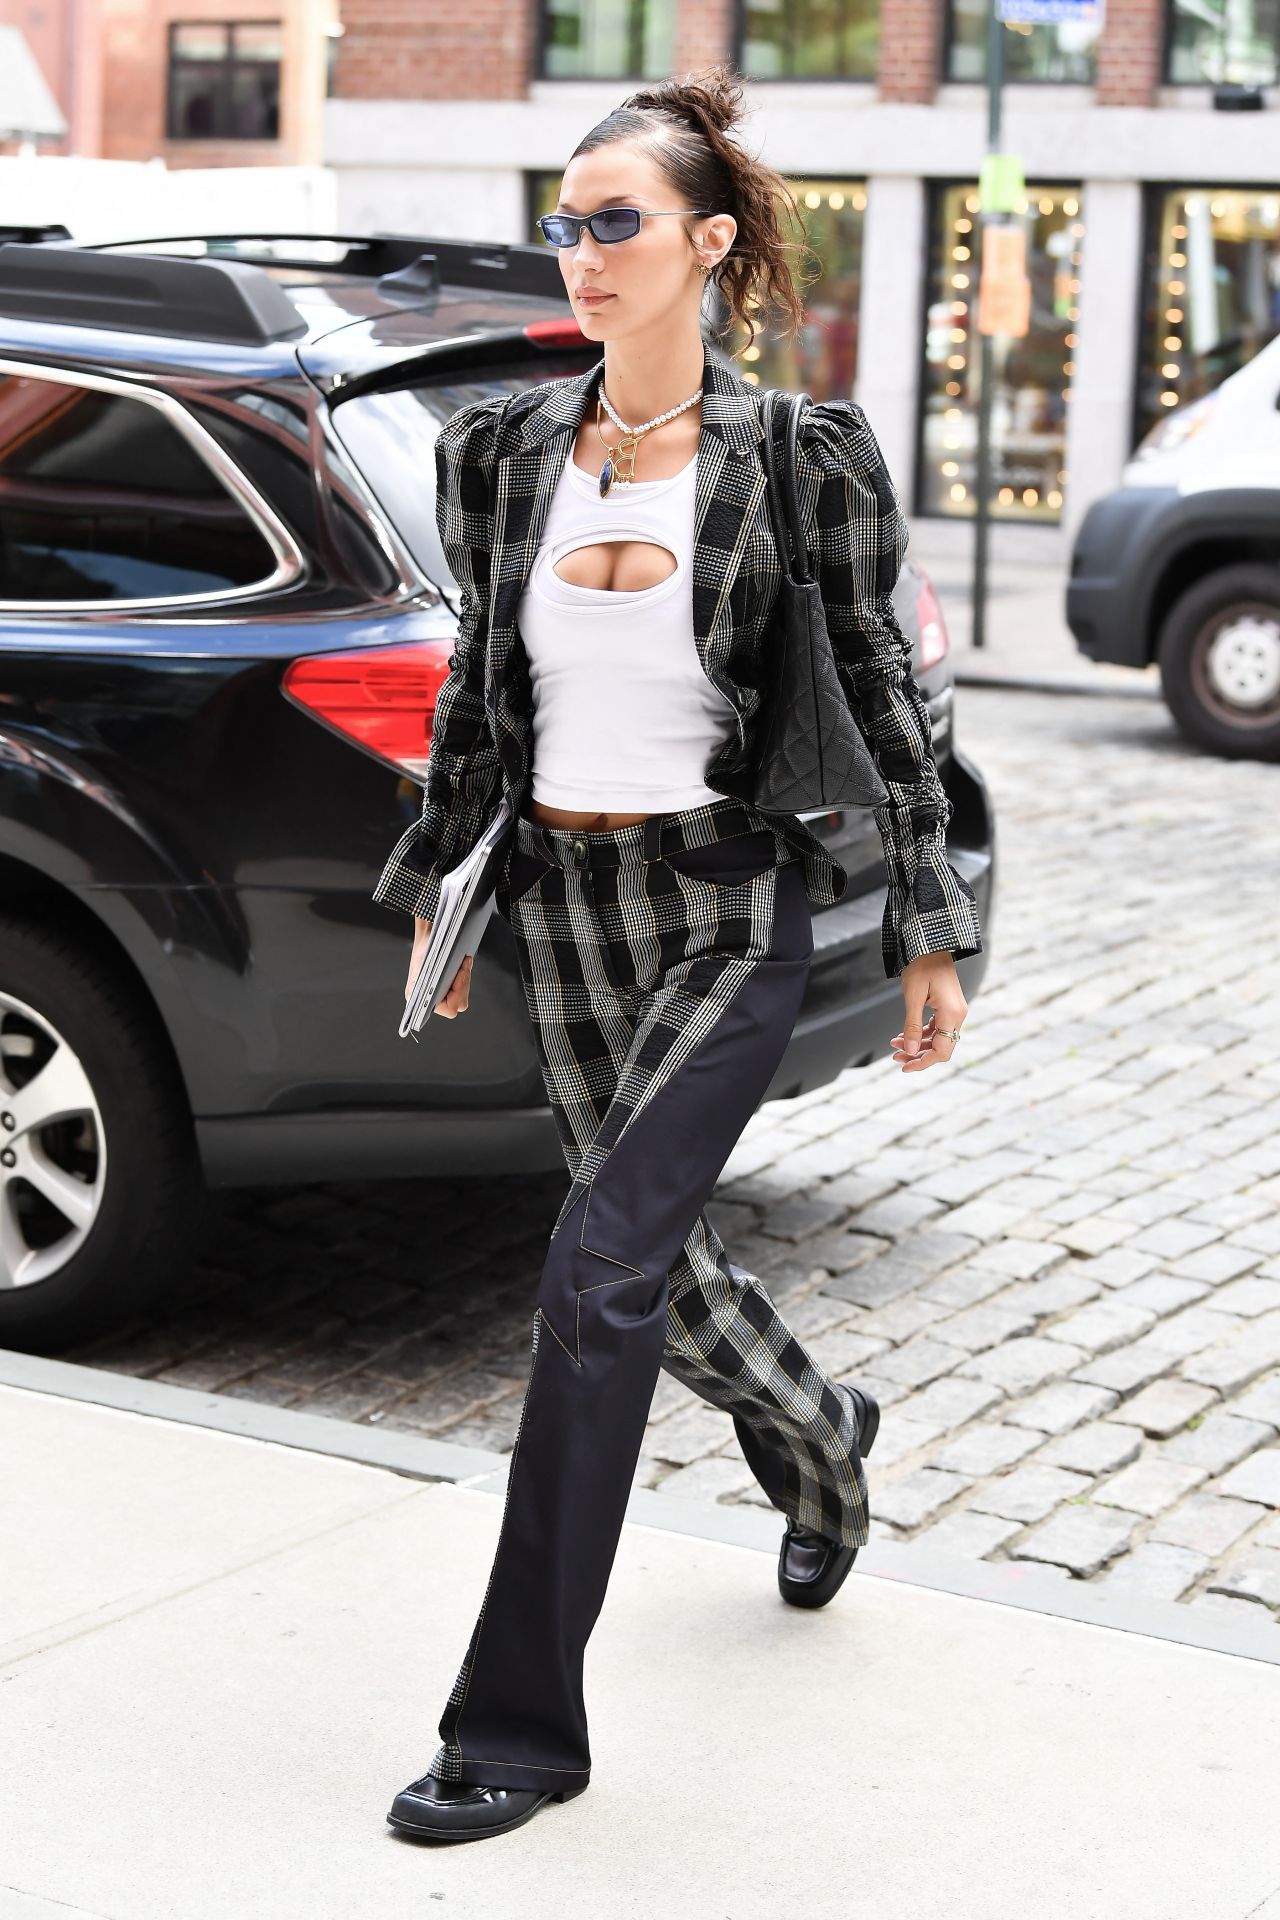 Bella Hadid in a Patterned Outfit - New York 09/21/2021 • CelebMafia